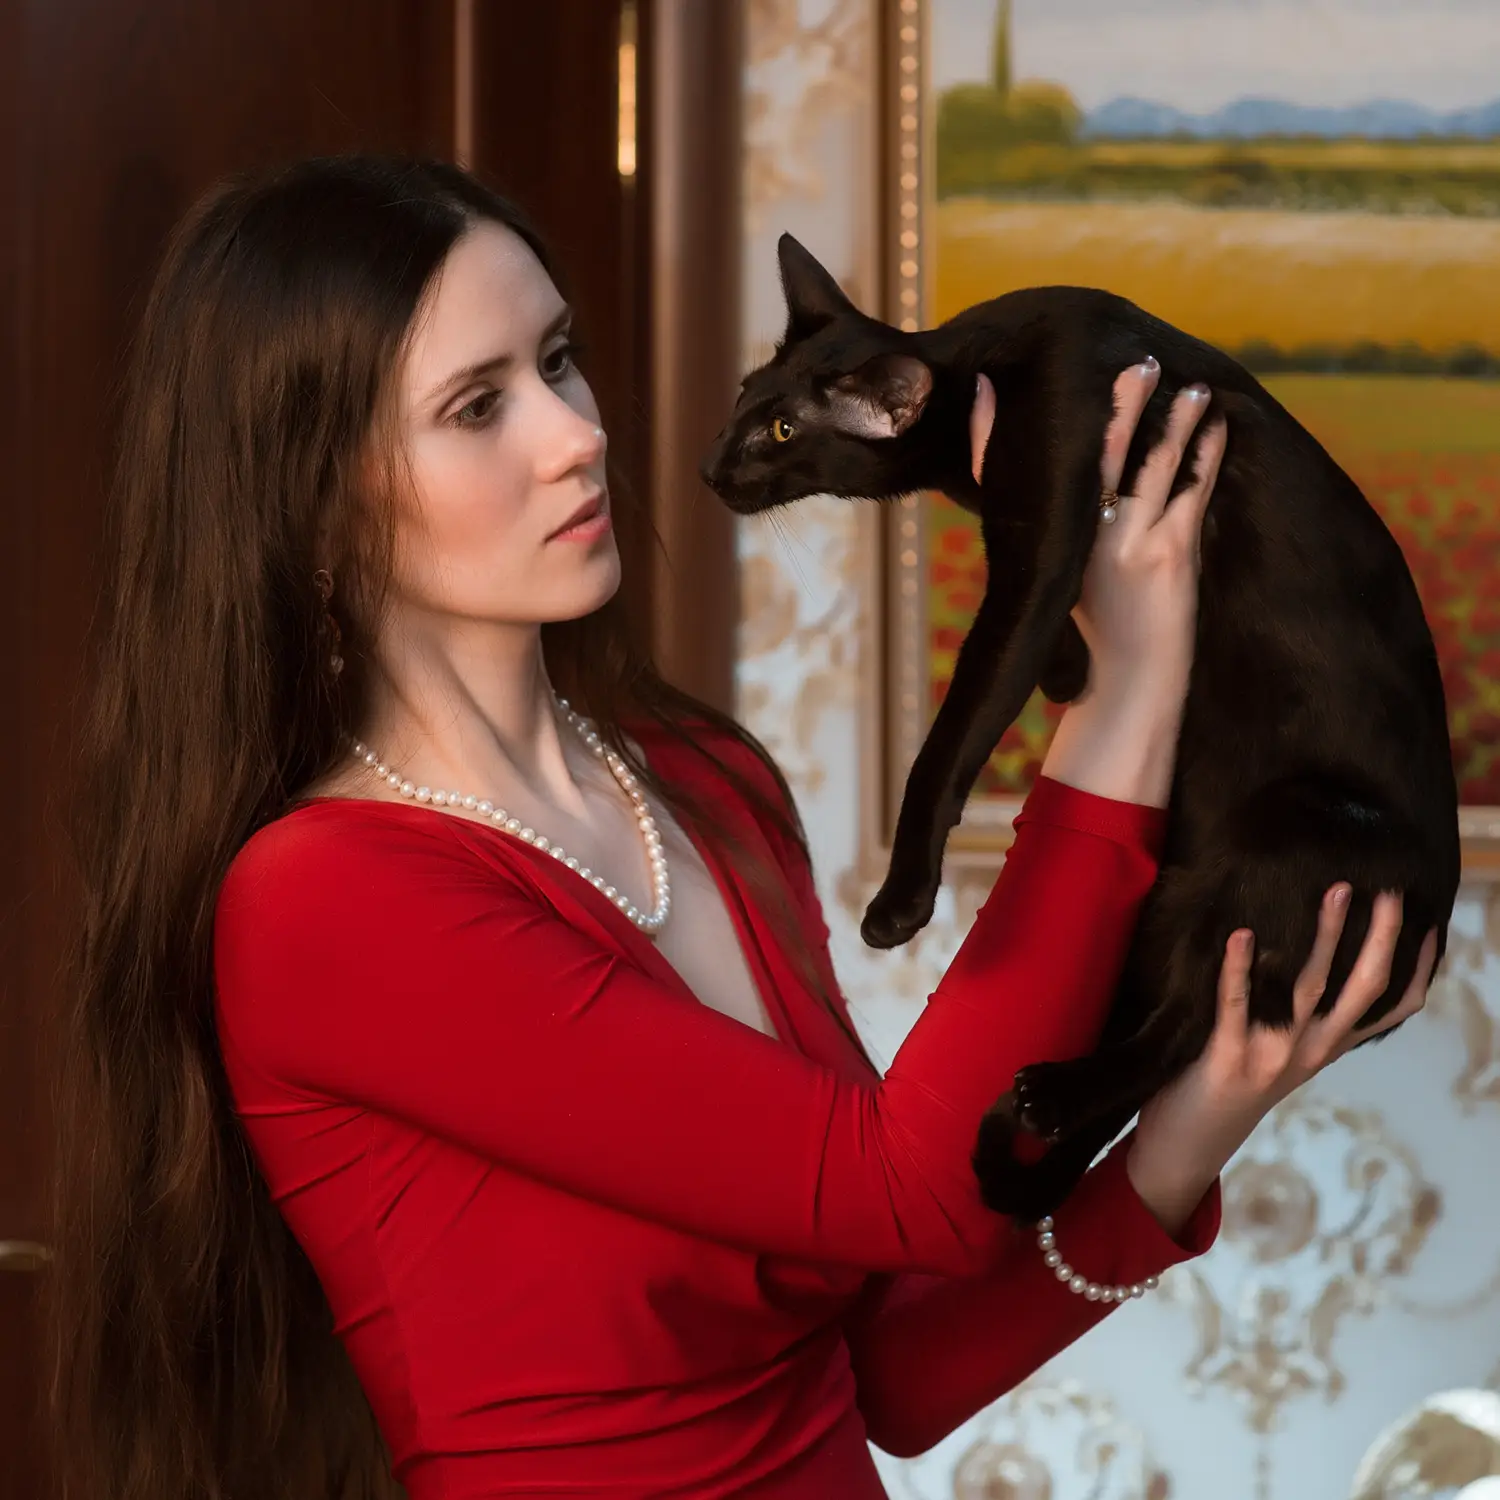 Olga Shatokhina, a breeder of Oriental Shorthair and Siamese cats, holds a black Oriental cat in her arms.